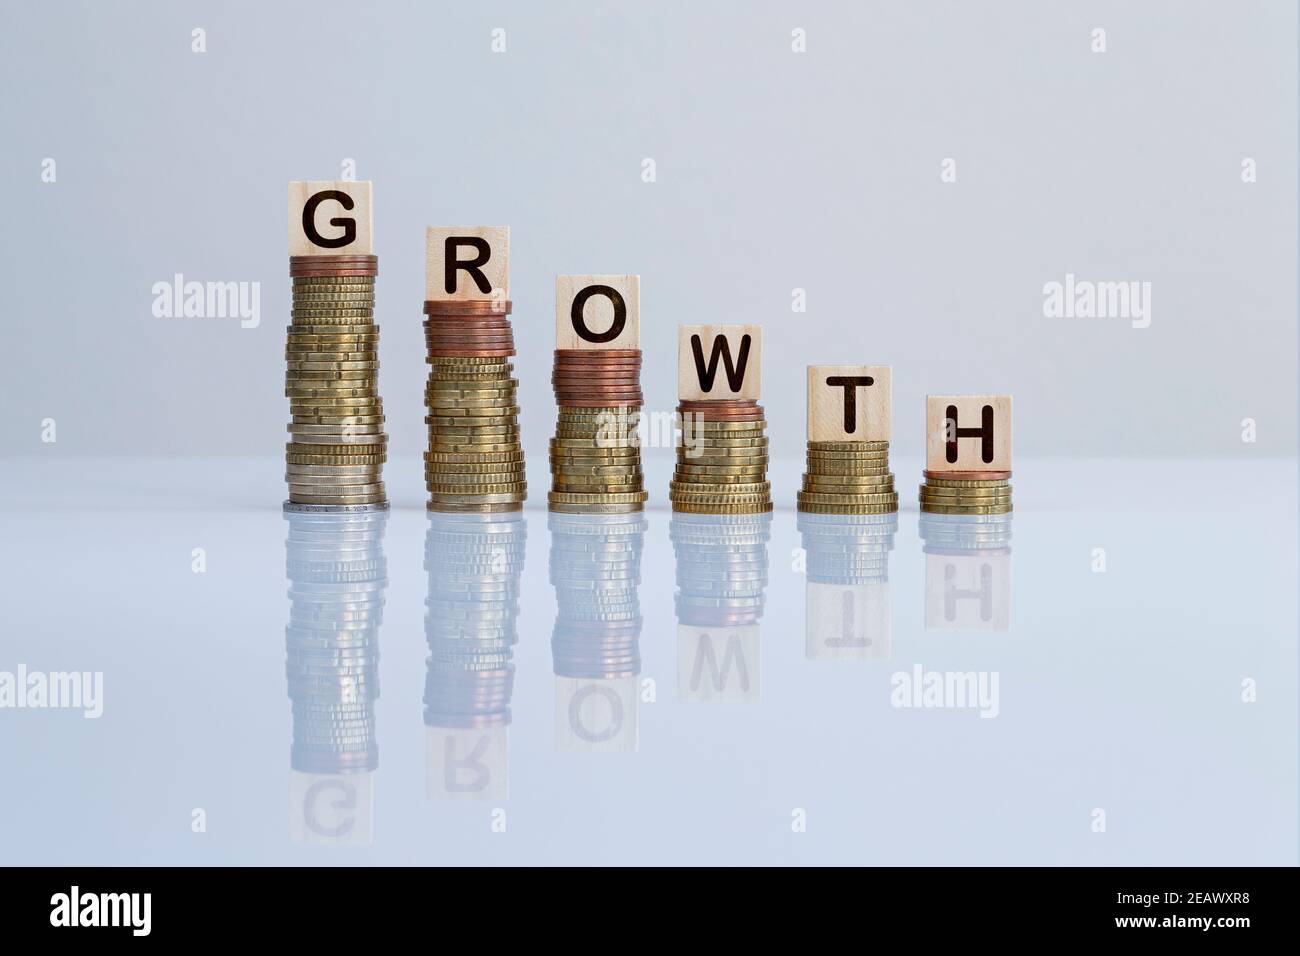 Word 'GROWTH' on wooden blocks on top of descending stacks of coins on gray. Concept photo of economic crisis, recession and financial reduction. Stock Photo